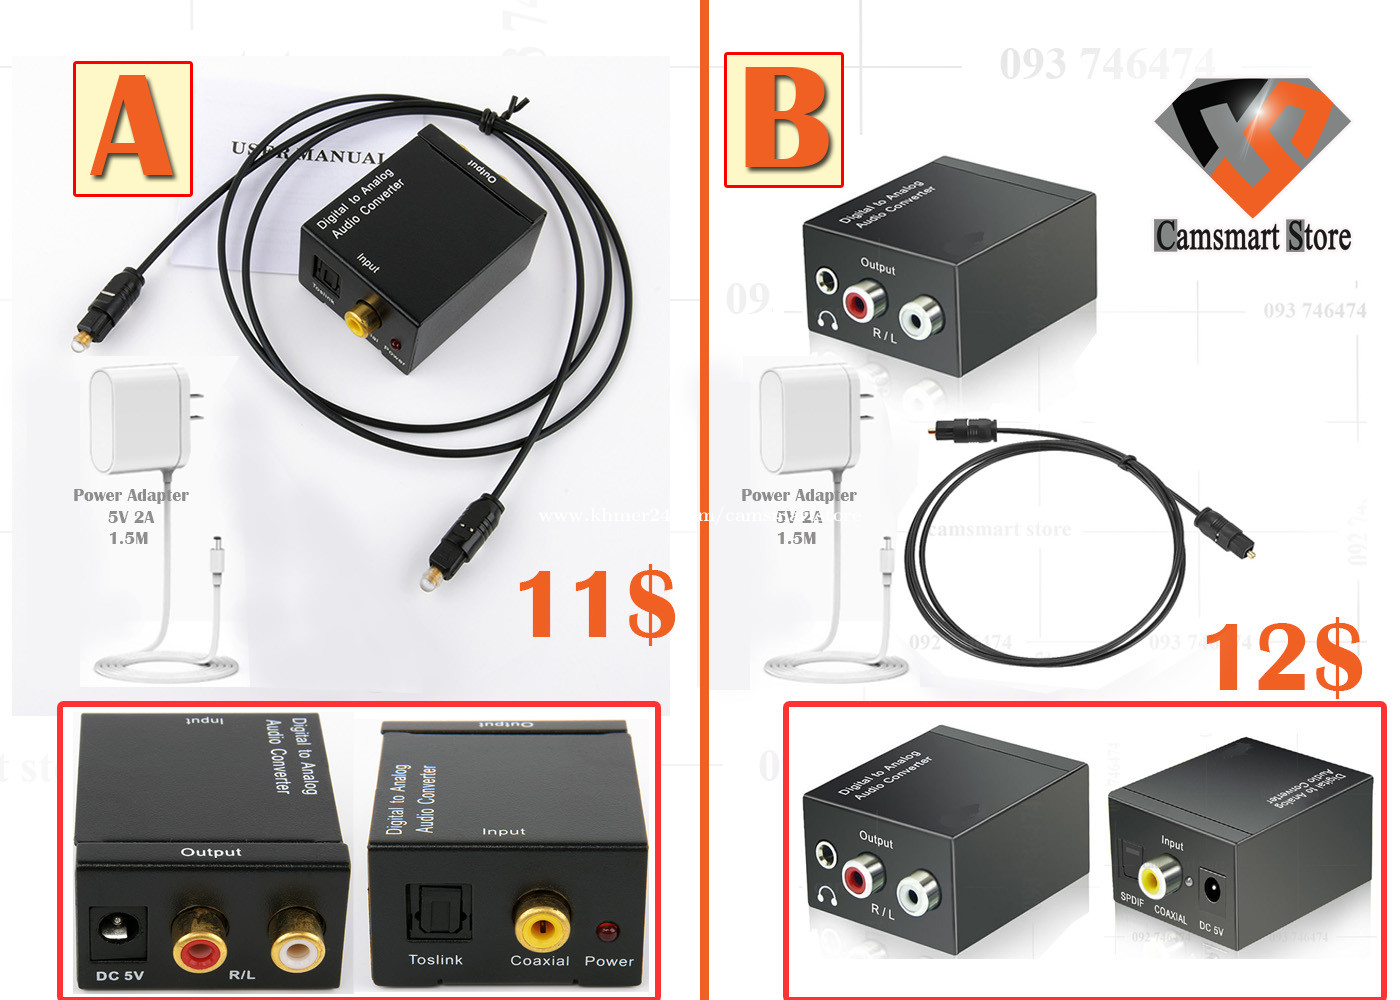 Labe shuffle Contain Protable 3.5mm Jack Coaxial Optical Fiber Digital To Analog Audio AUX RCA  L/R Converter SPDIF in Phnom Penh, Cambodia on Khmer24.com